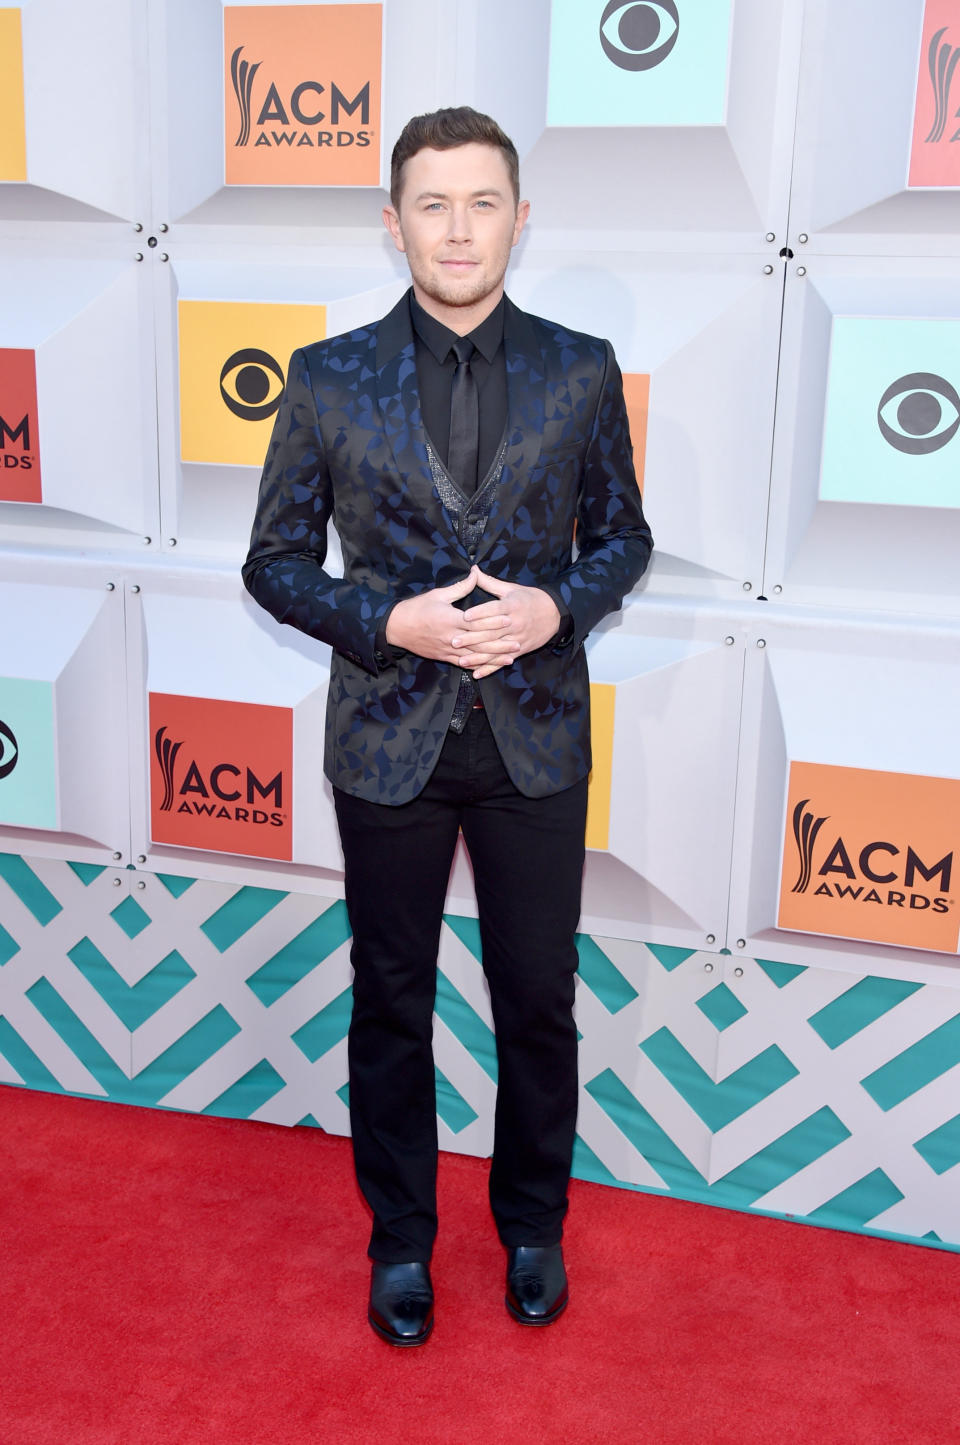 LAS VEGAS, NEVADA - APRIL 03:  Recording artist Scotty McCreery attends the 51st Academy of Country Music Awards at MGM Grand Garden Arena on April 3, 2016 in Las Vegas, Nevada.  (Photo by John Shearer/WireImage)